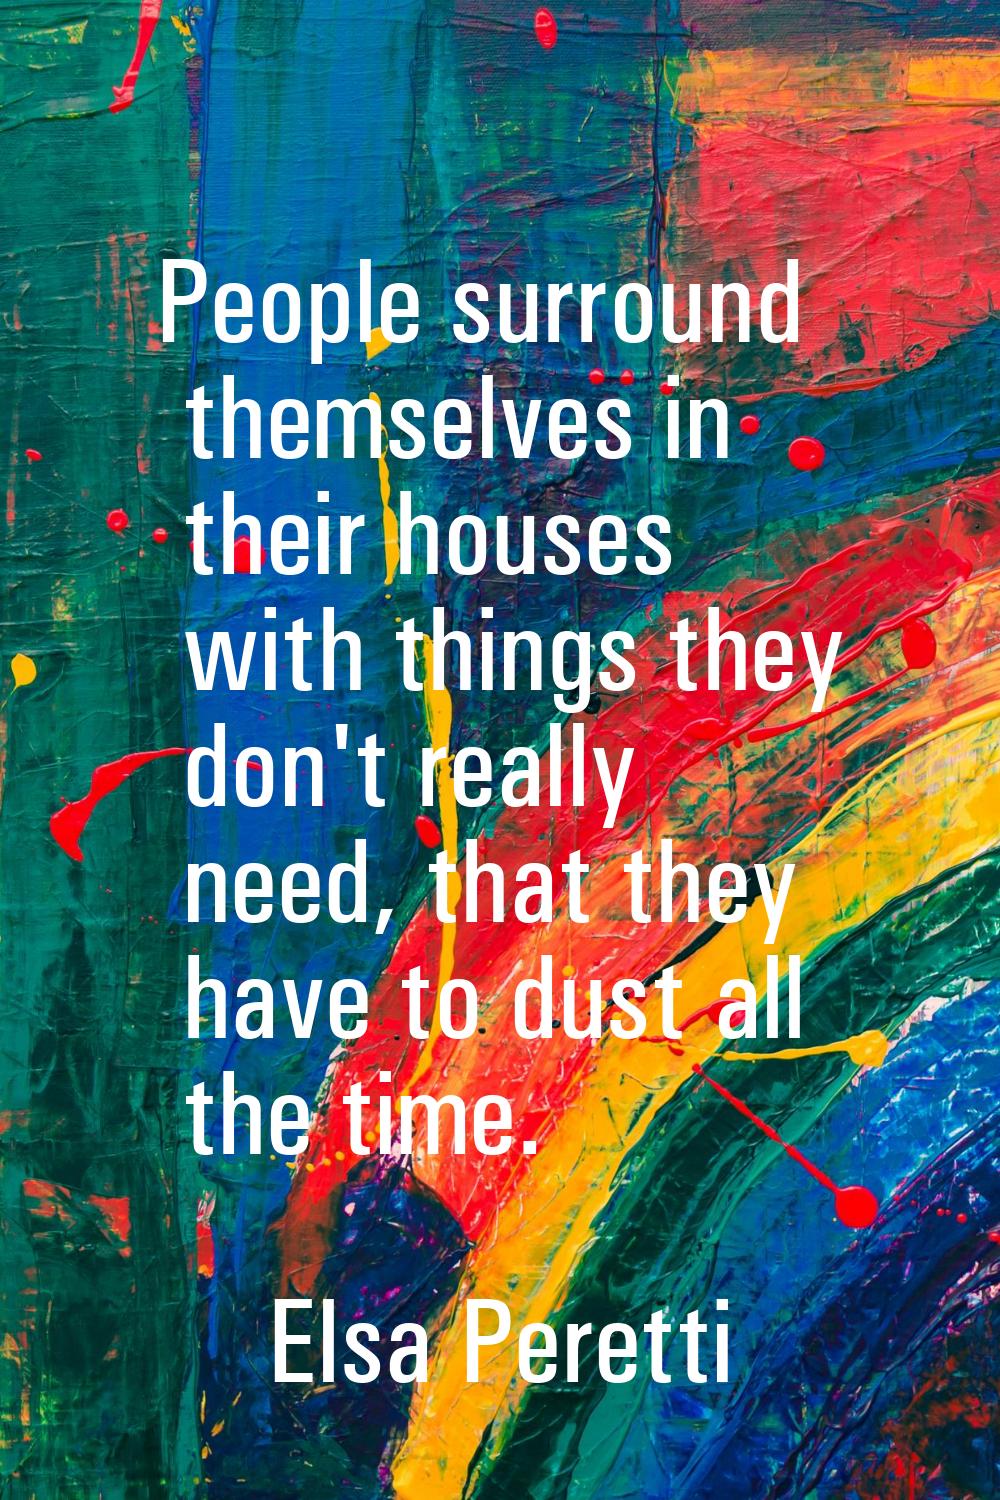 People surround themselves in their houses with things they don't really need, that they have to du